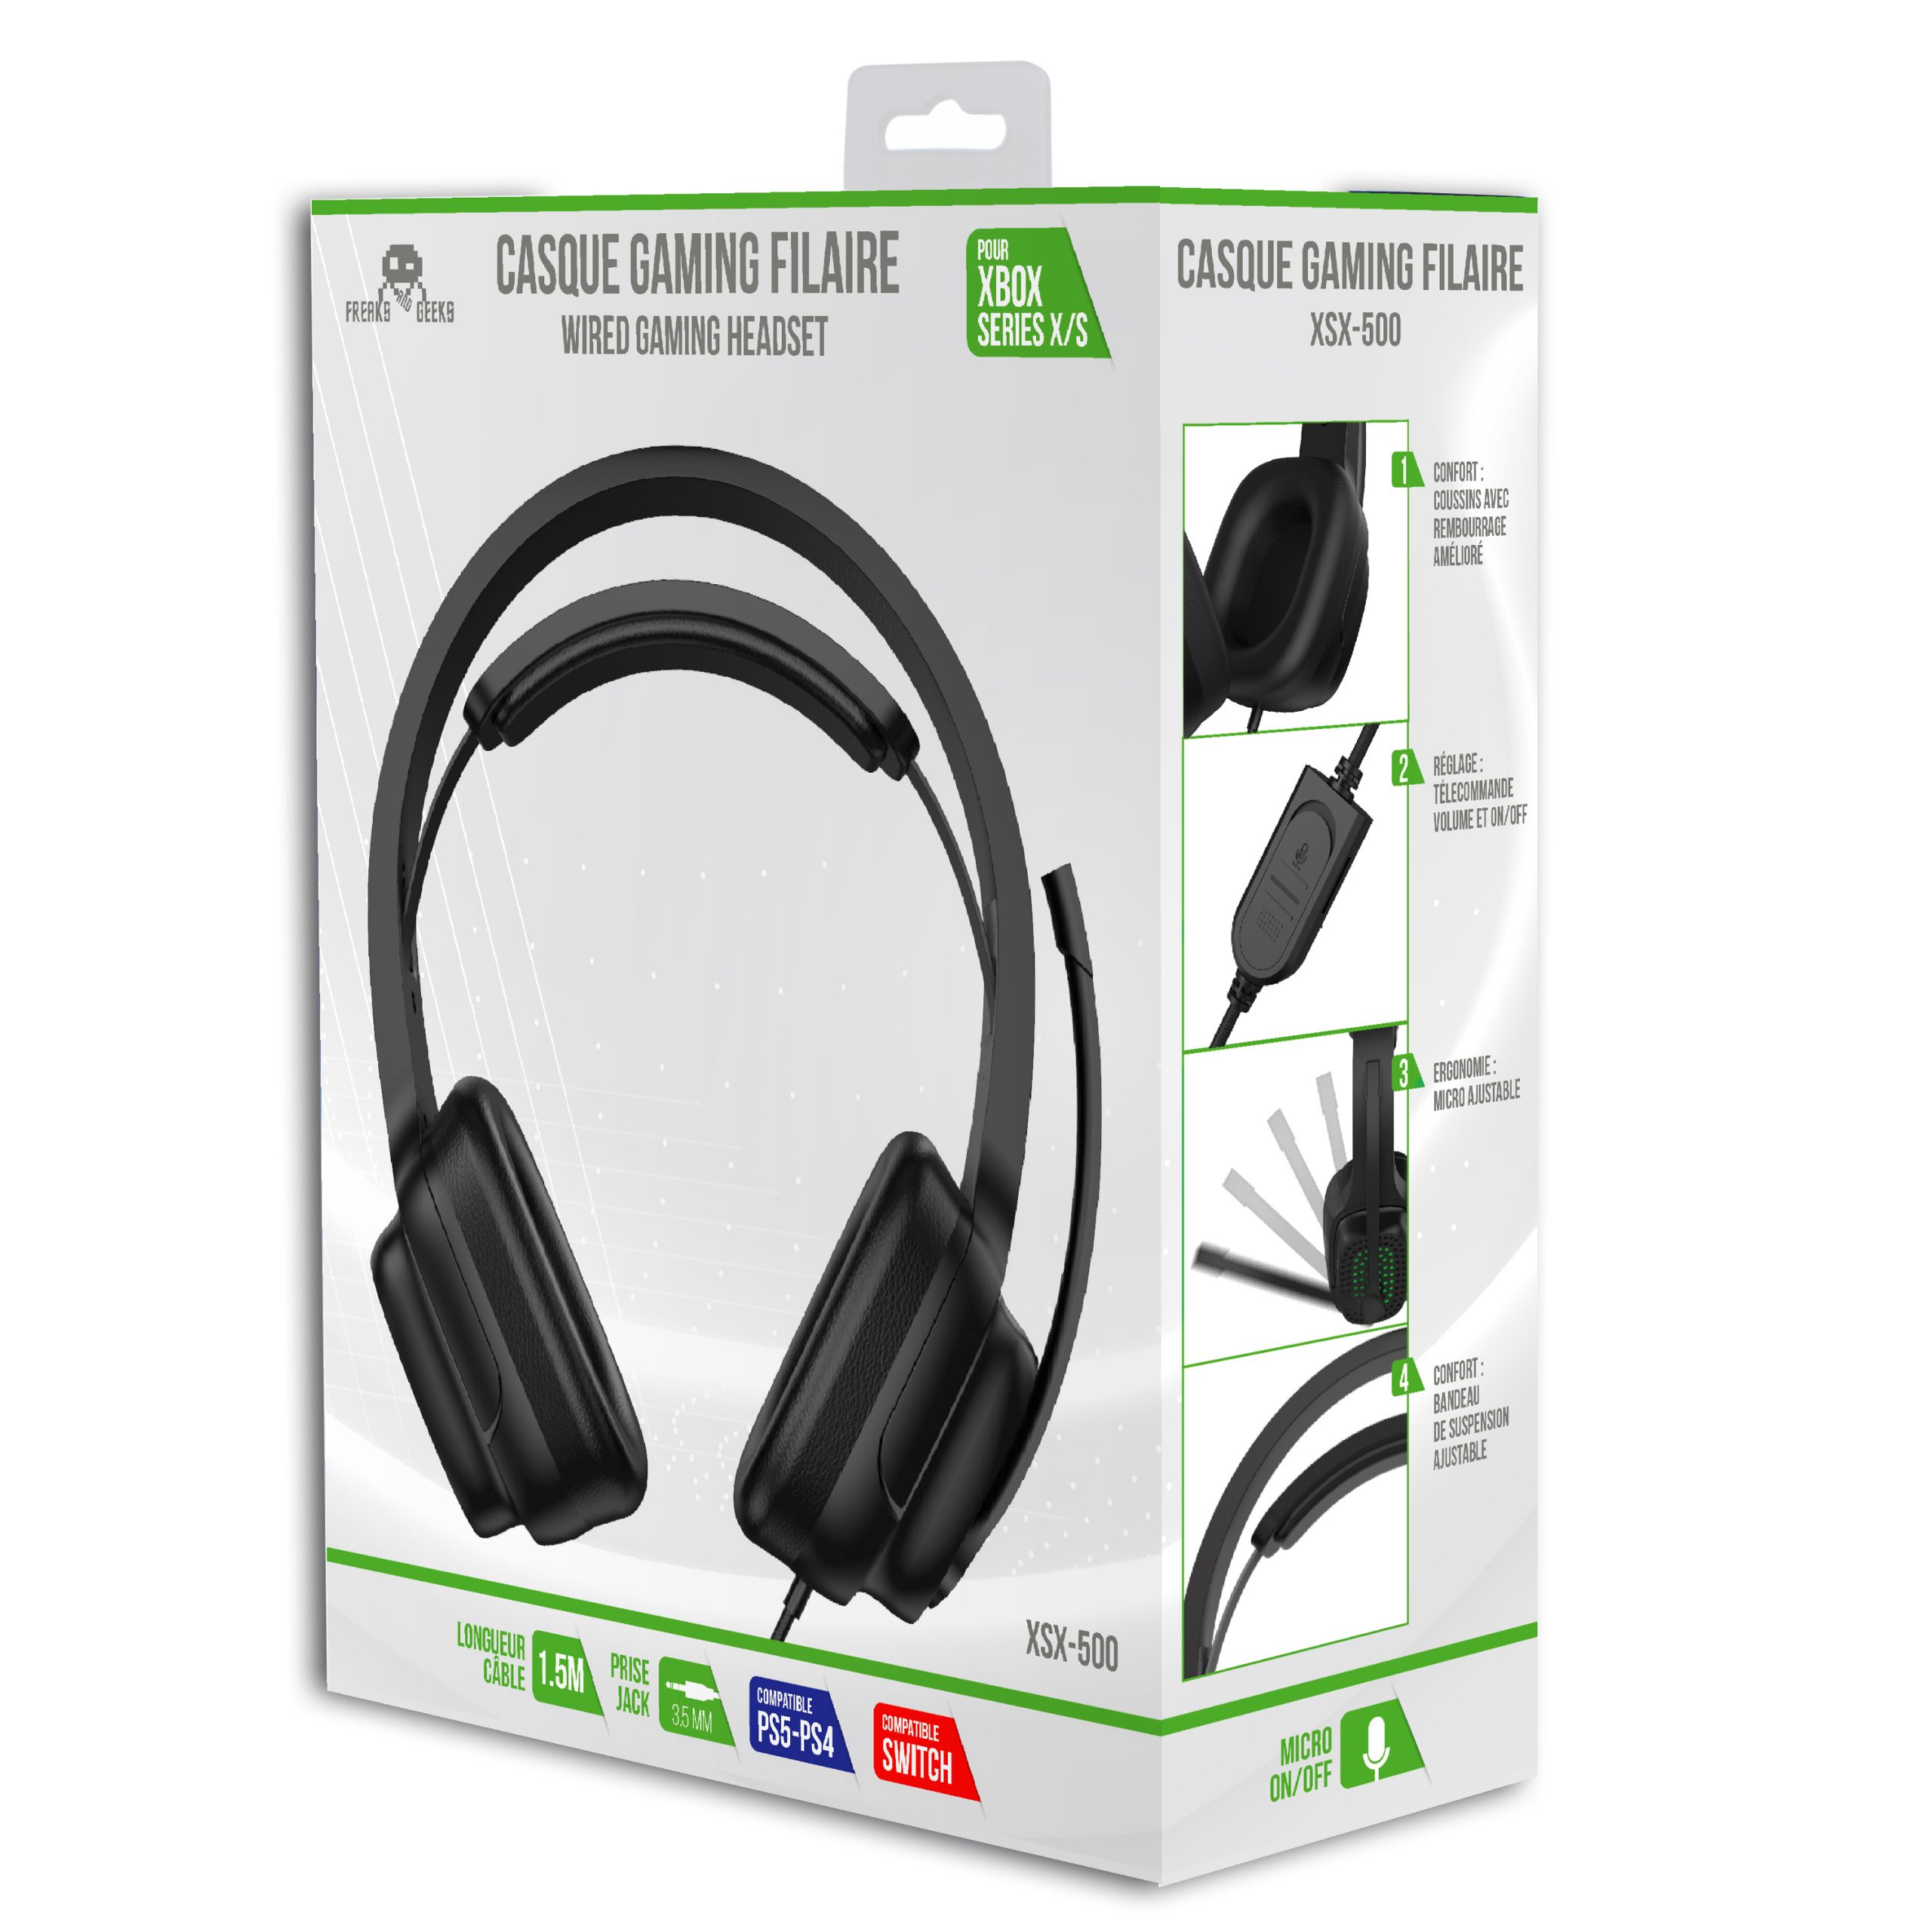 Casque gaming blanc avec micro compatible ps5 xbox seire x/s ps4